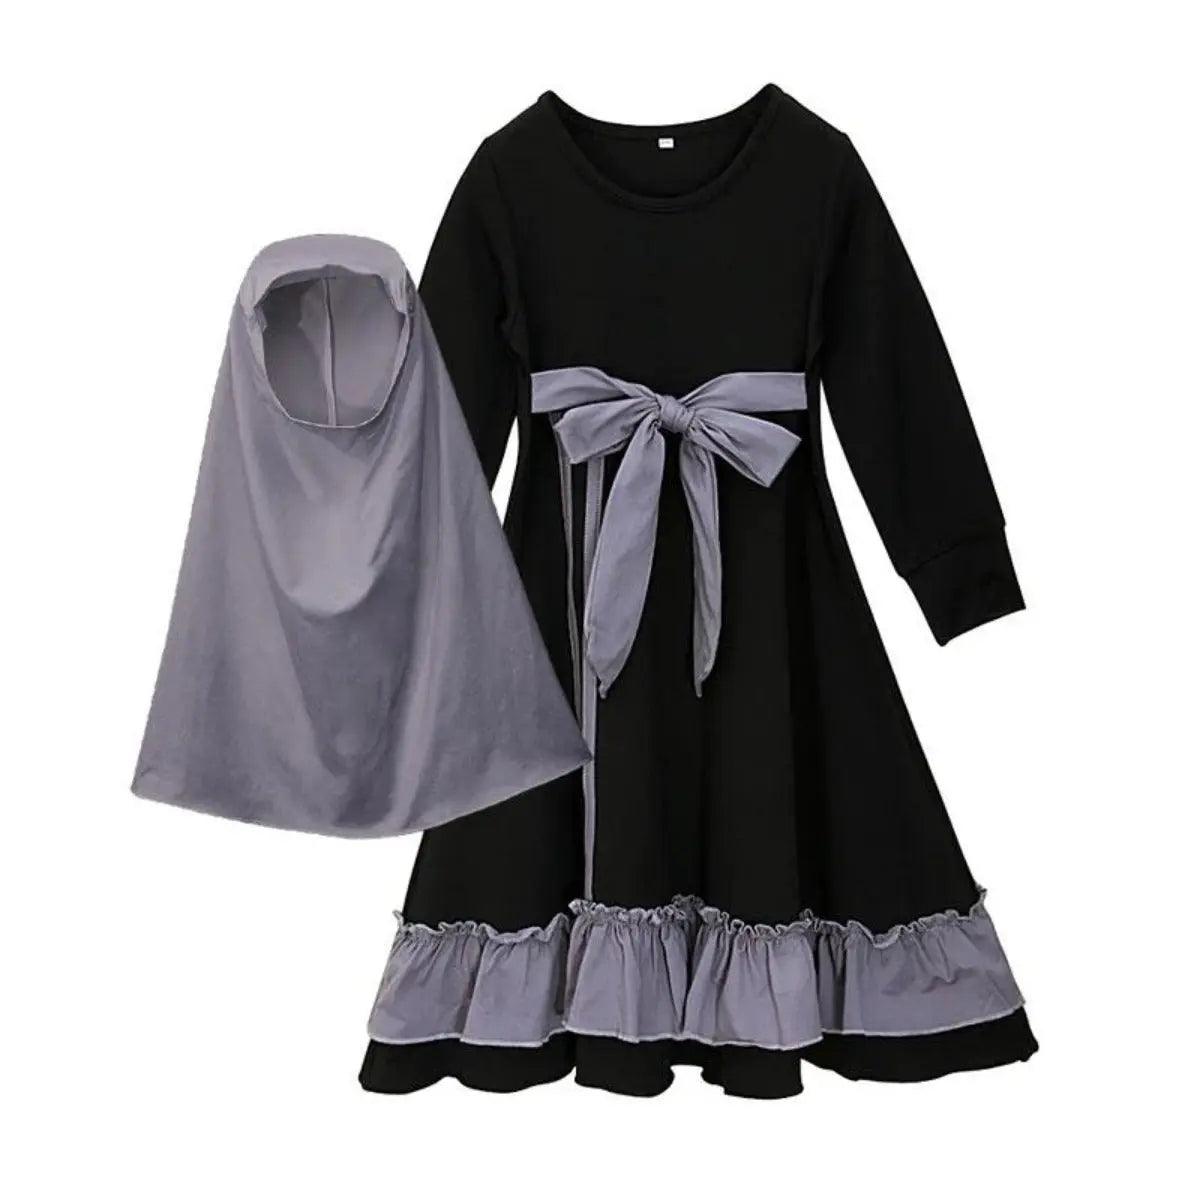 MJ014 Black Two Piece Kids Jlibab With Bow Tie Mariam's Collection